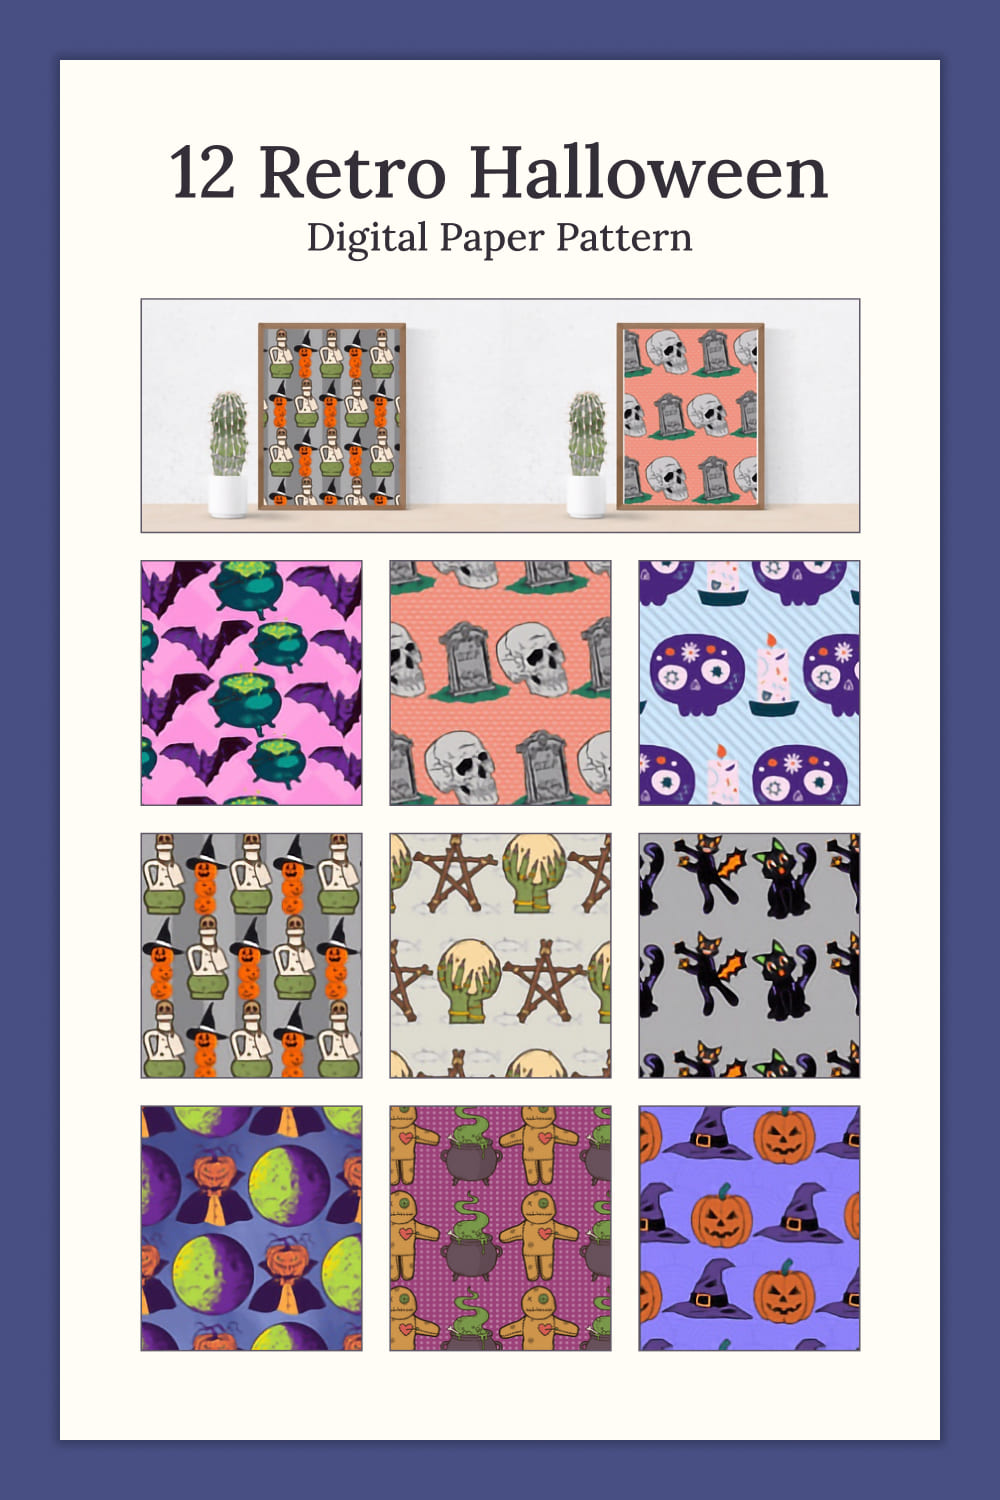 Collection of wonderful paper retro patterns for halloween theme.